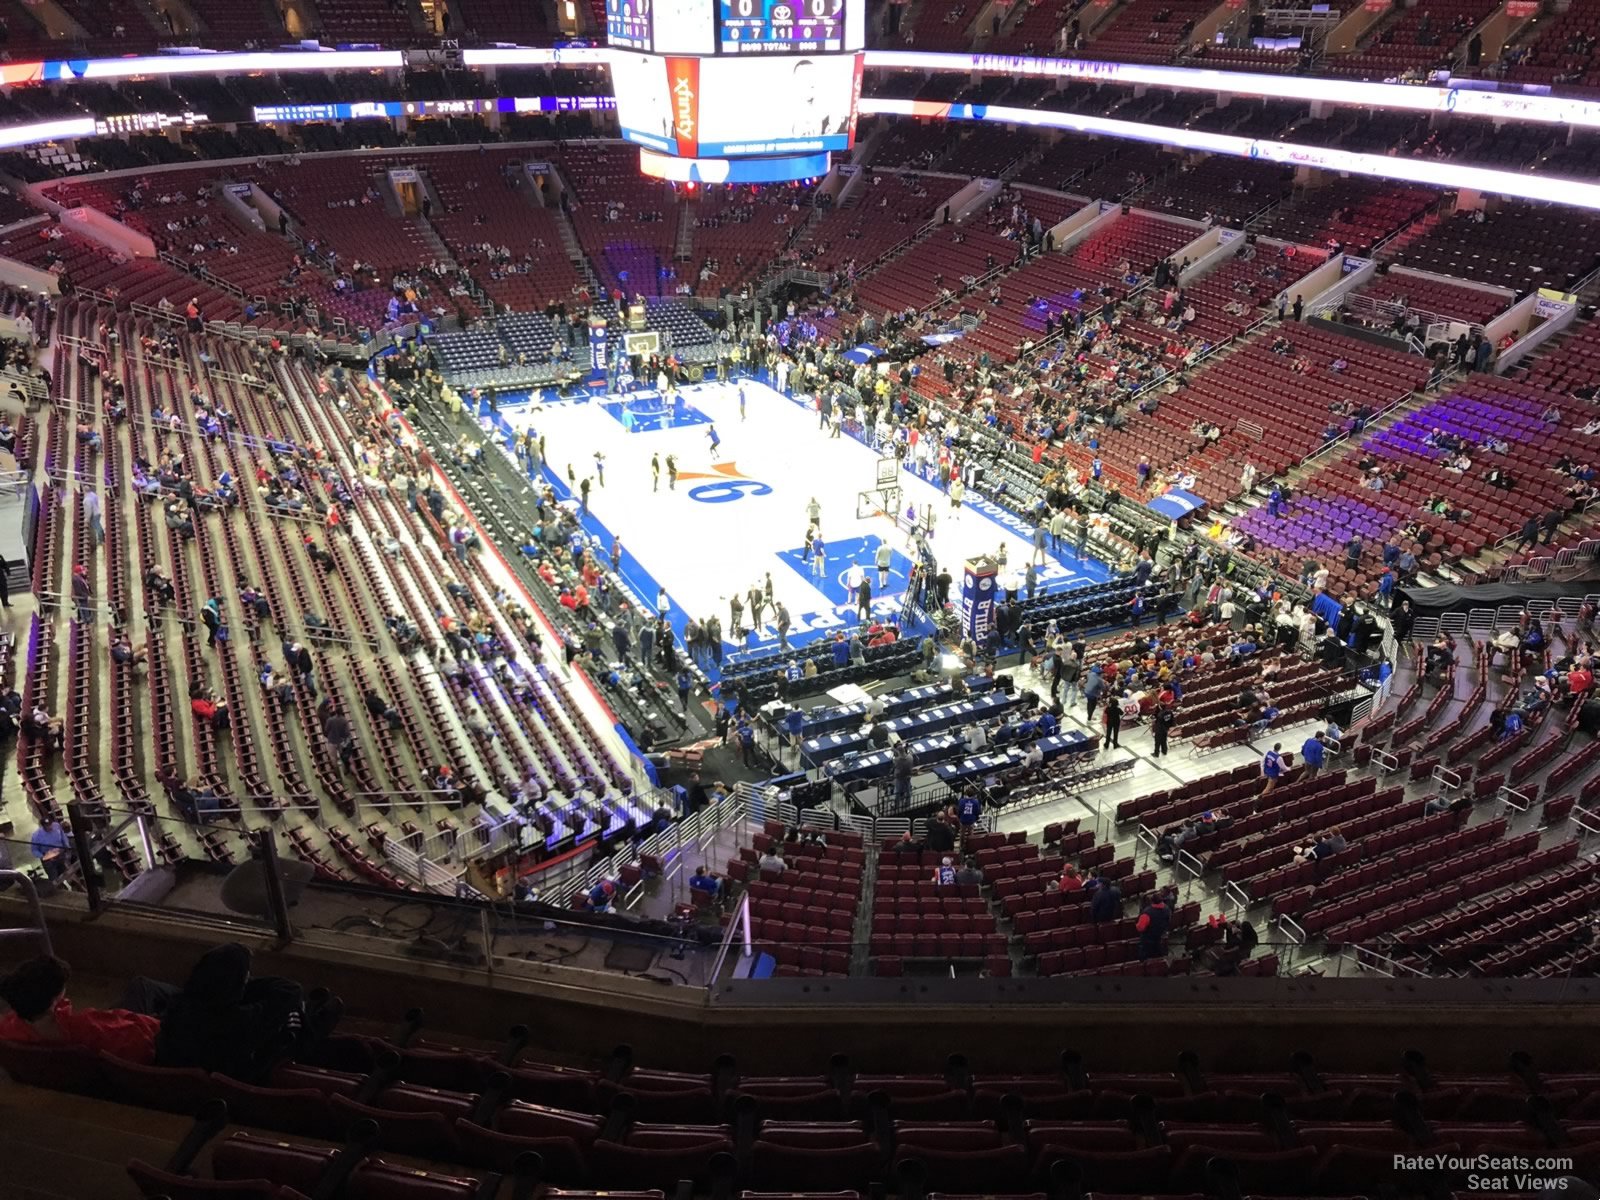 section 217a, row 7 seat view  for basketball - wells fargo center